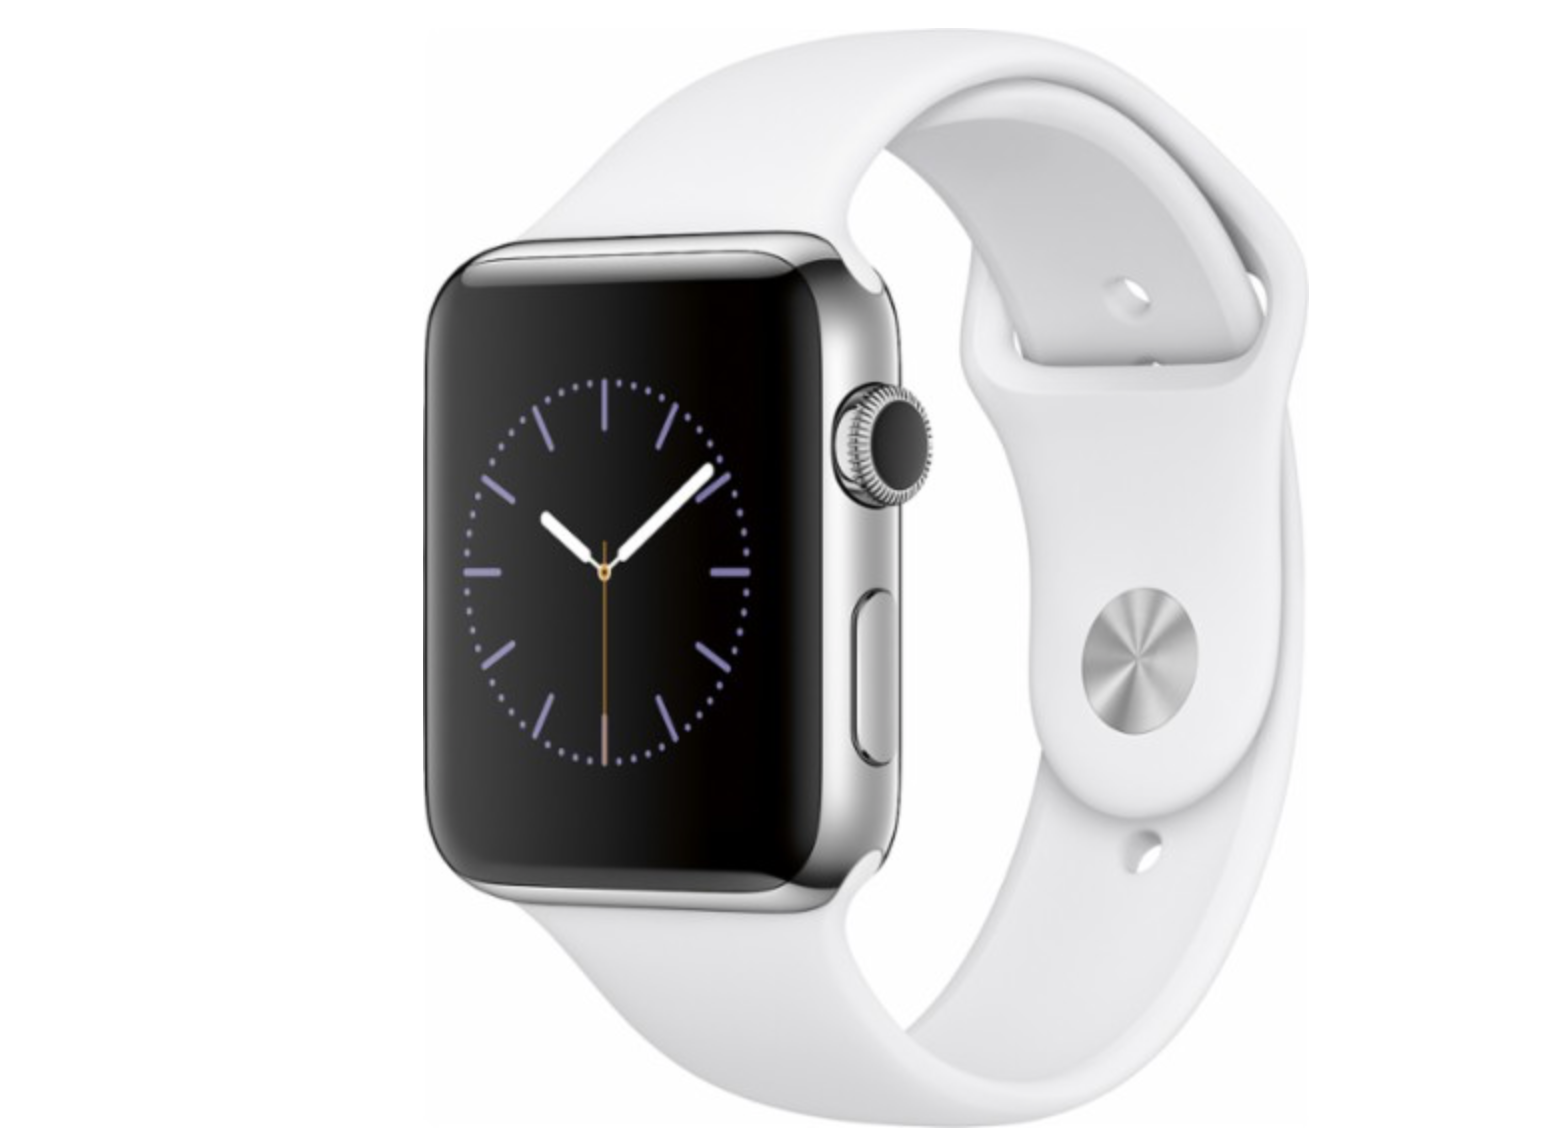 Great Deal: Get $100 Off Apple Watch Series 2 at Best Buy